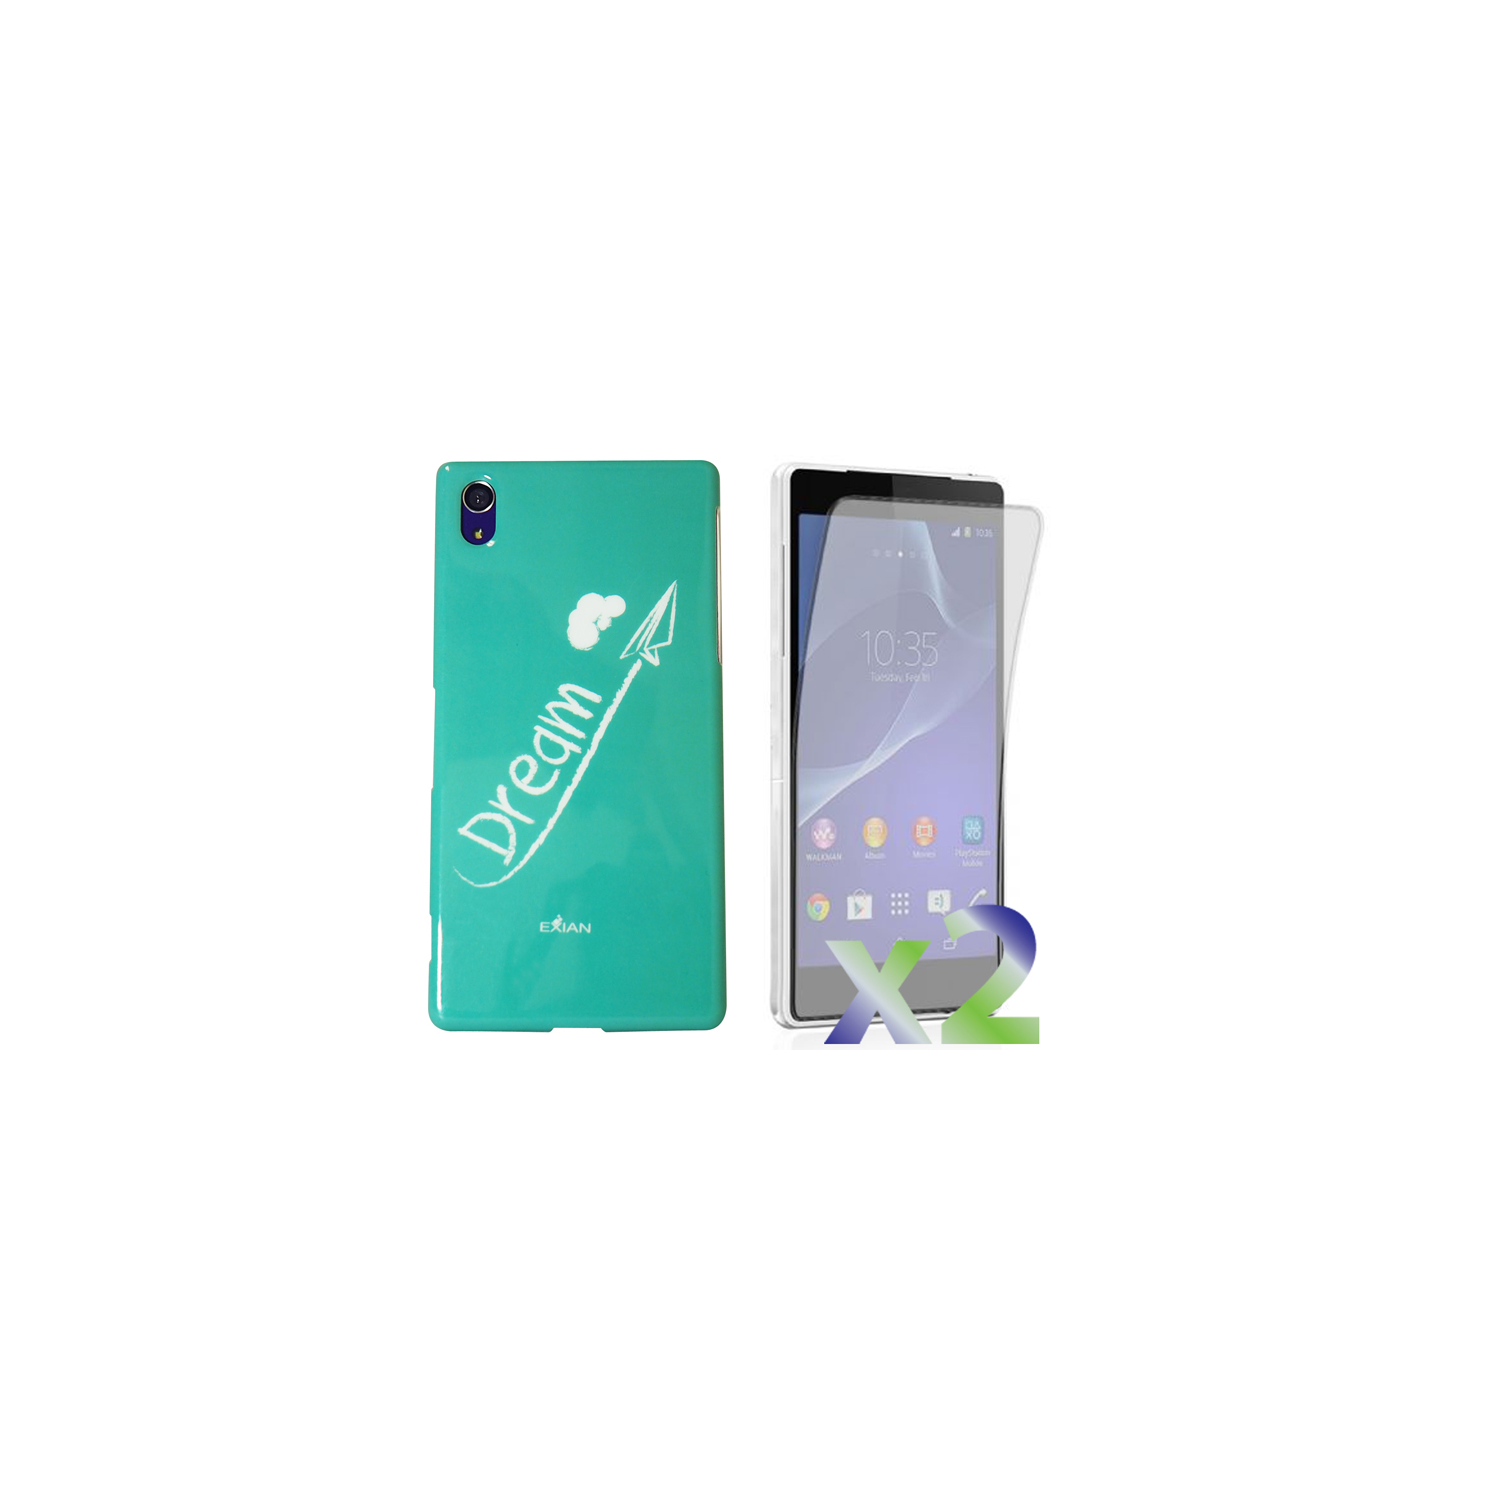 Exian Fitted Soft Shell Case for Sony Xperia Z2 - Teal